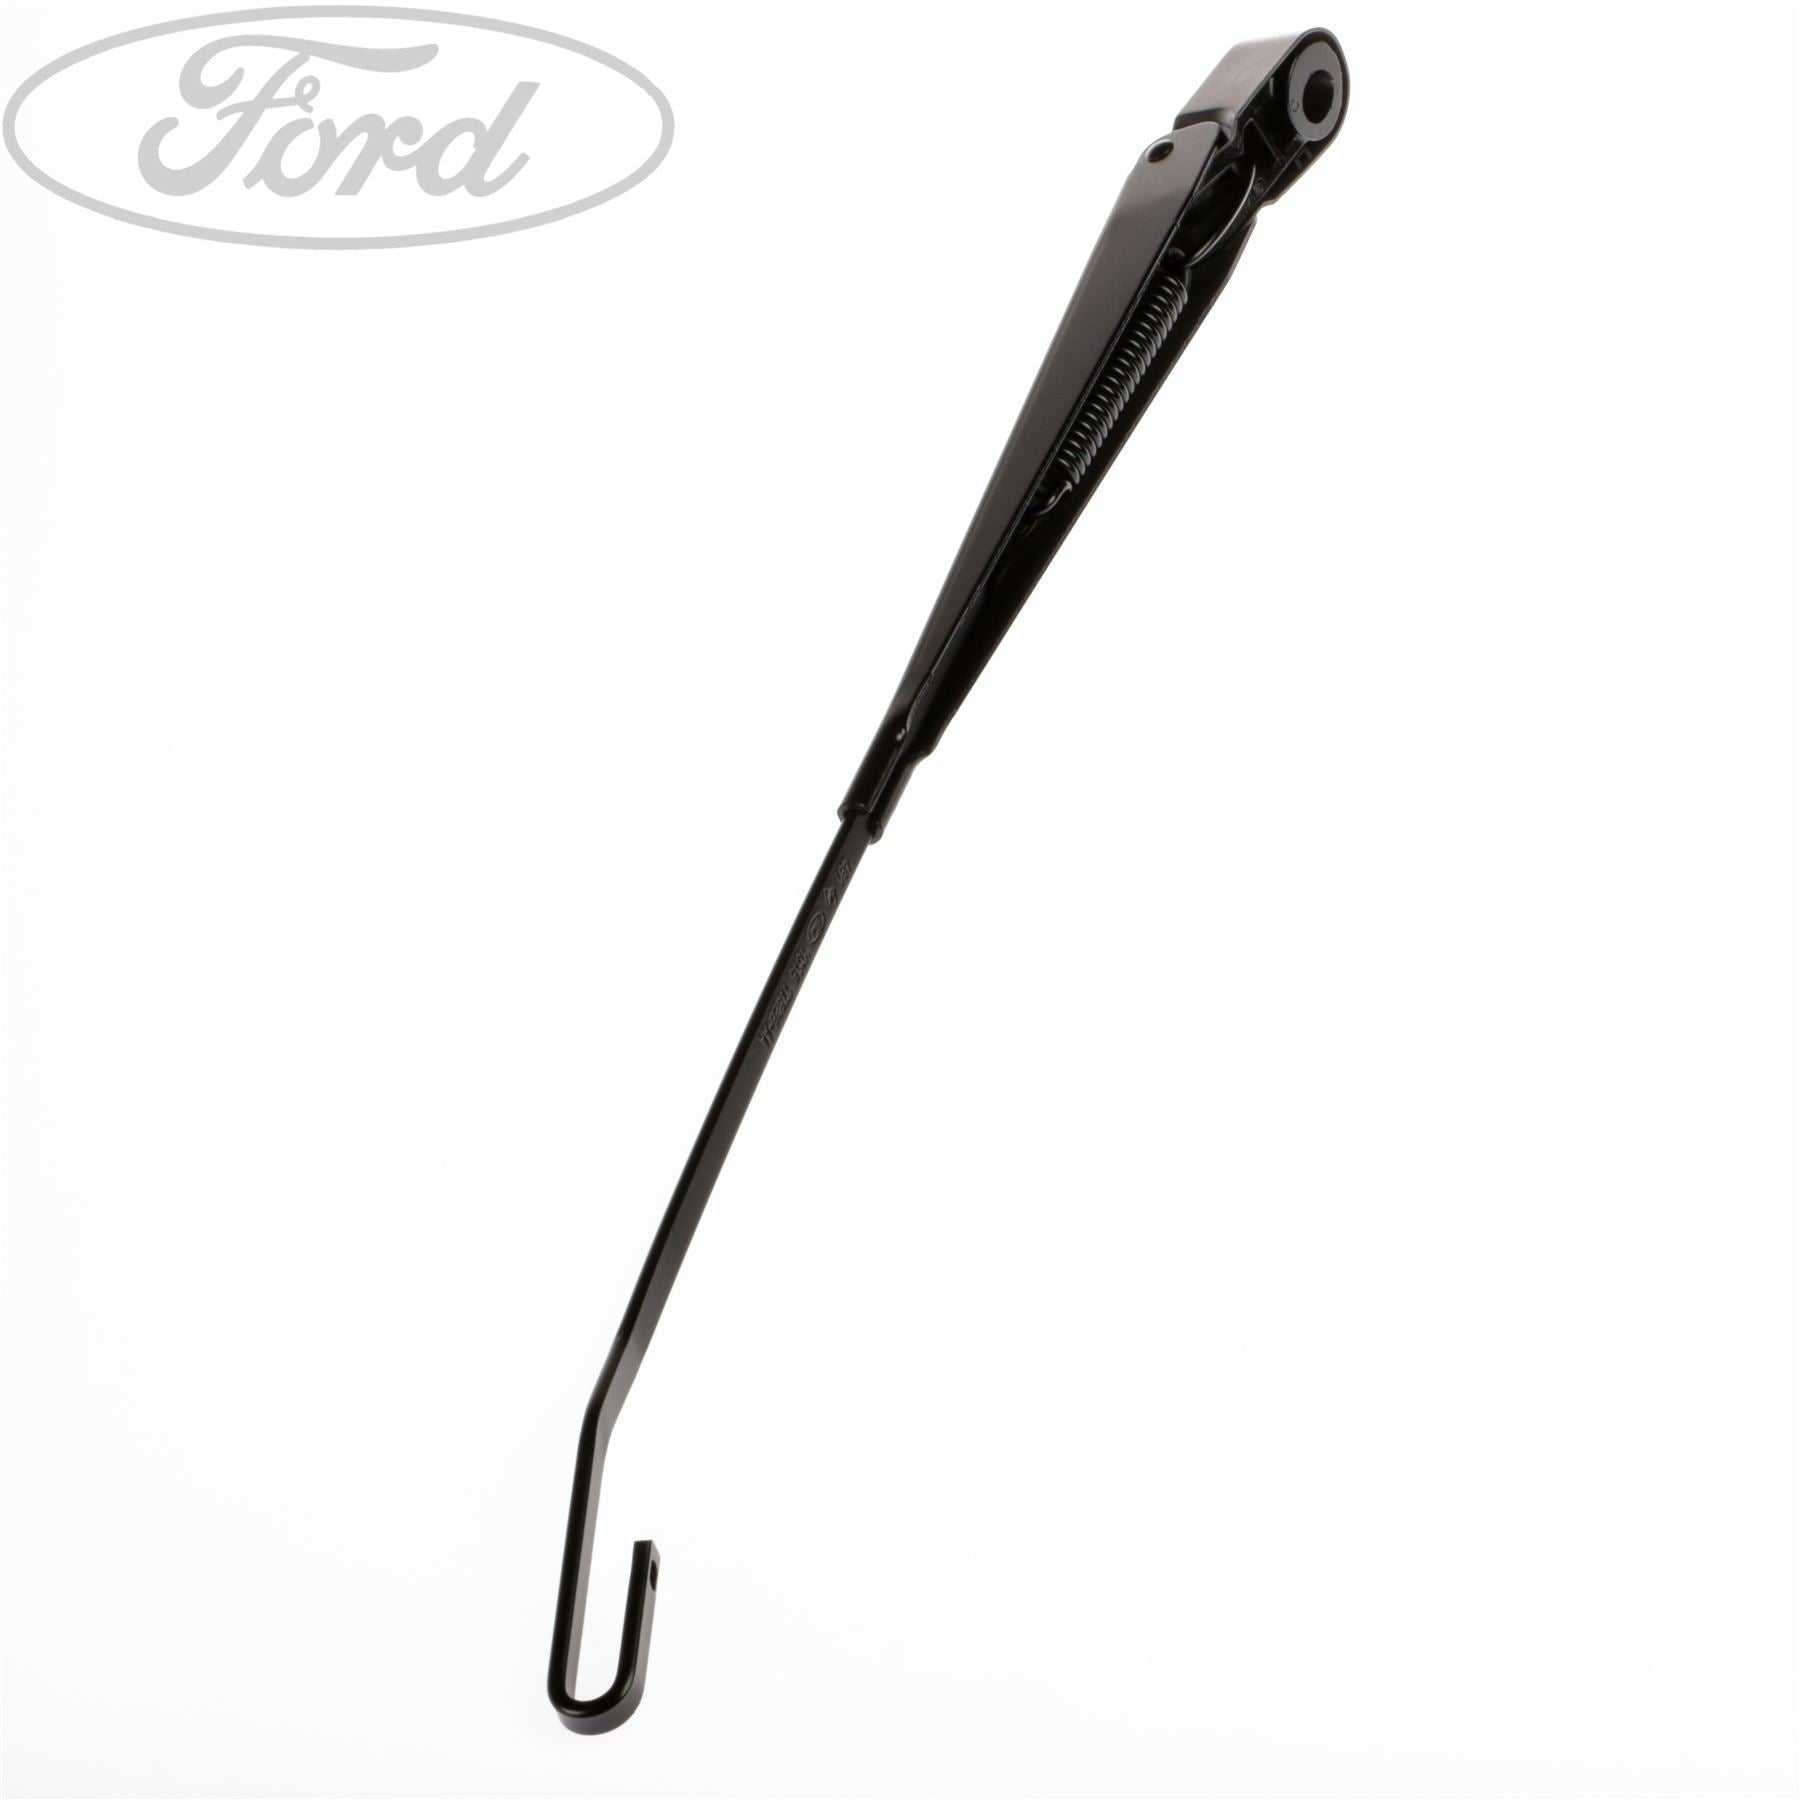 Ford, TRANSIT TRANSIT FRONT O/S WIPER ARM